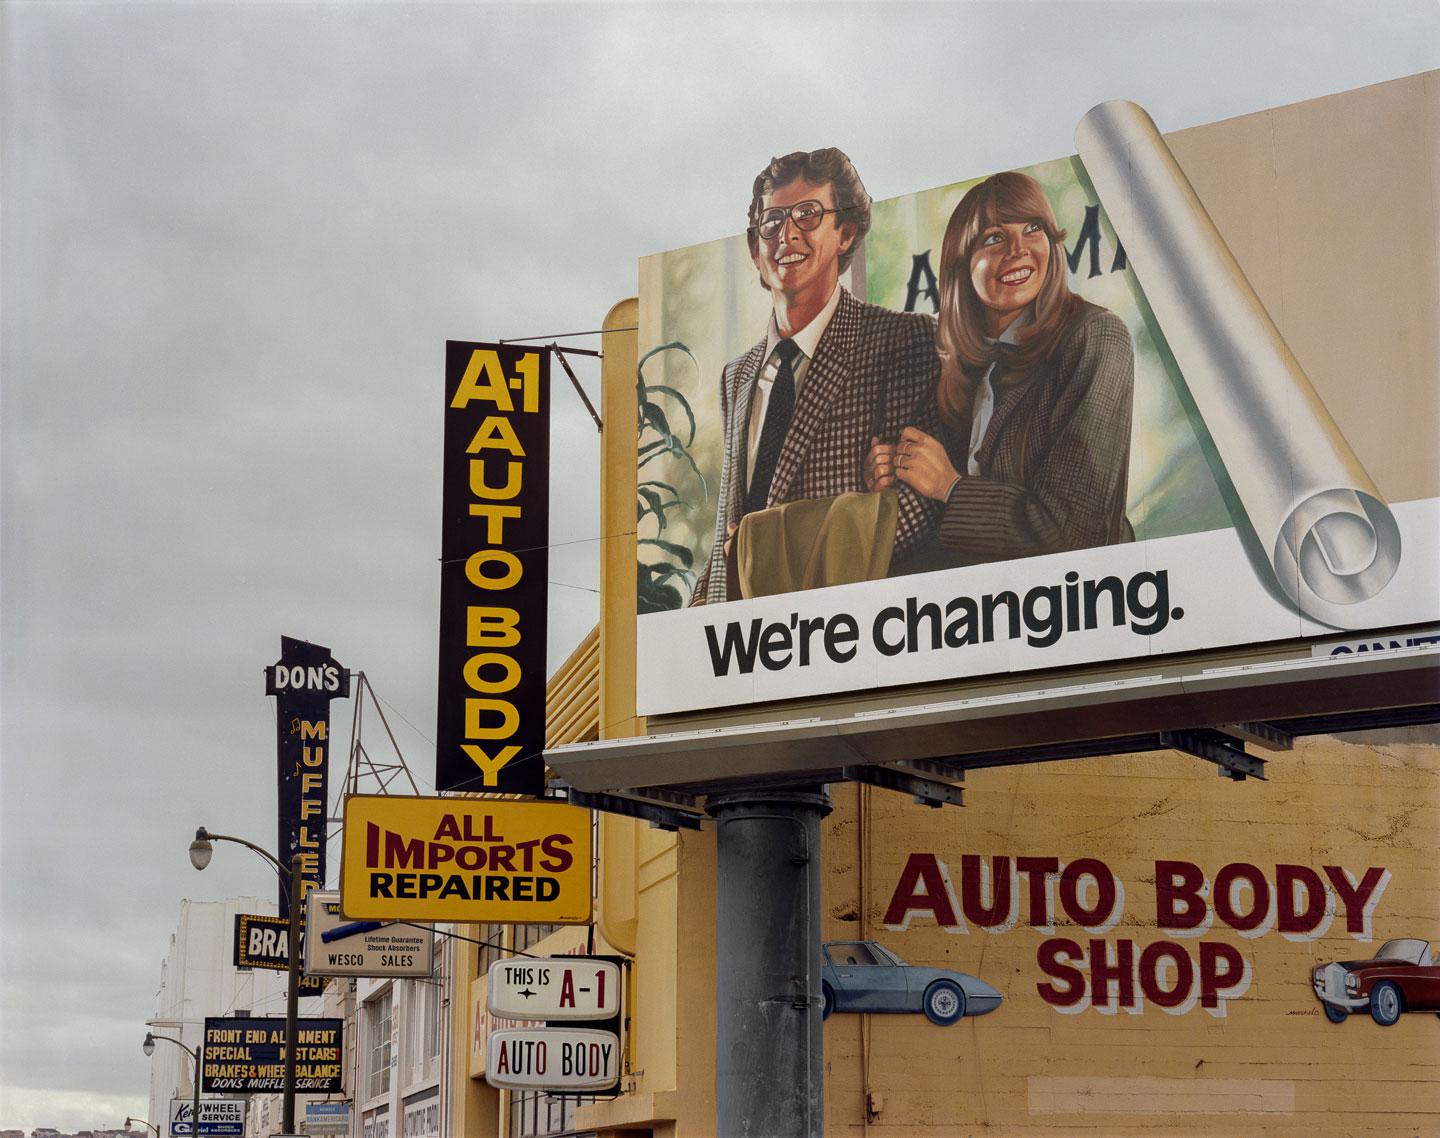 Janet Delaney’s South of Market: A look back at a changing San Francisco neighborhood in the 1970s and ’80s (PHOTOS).